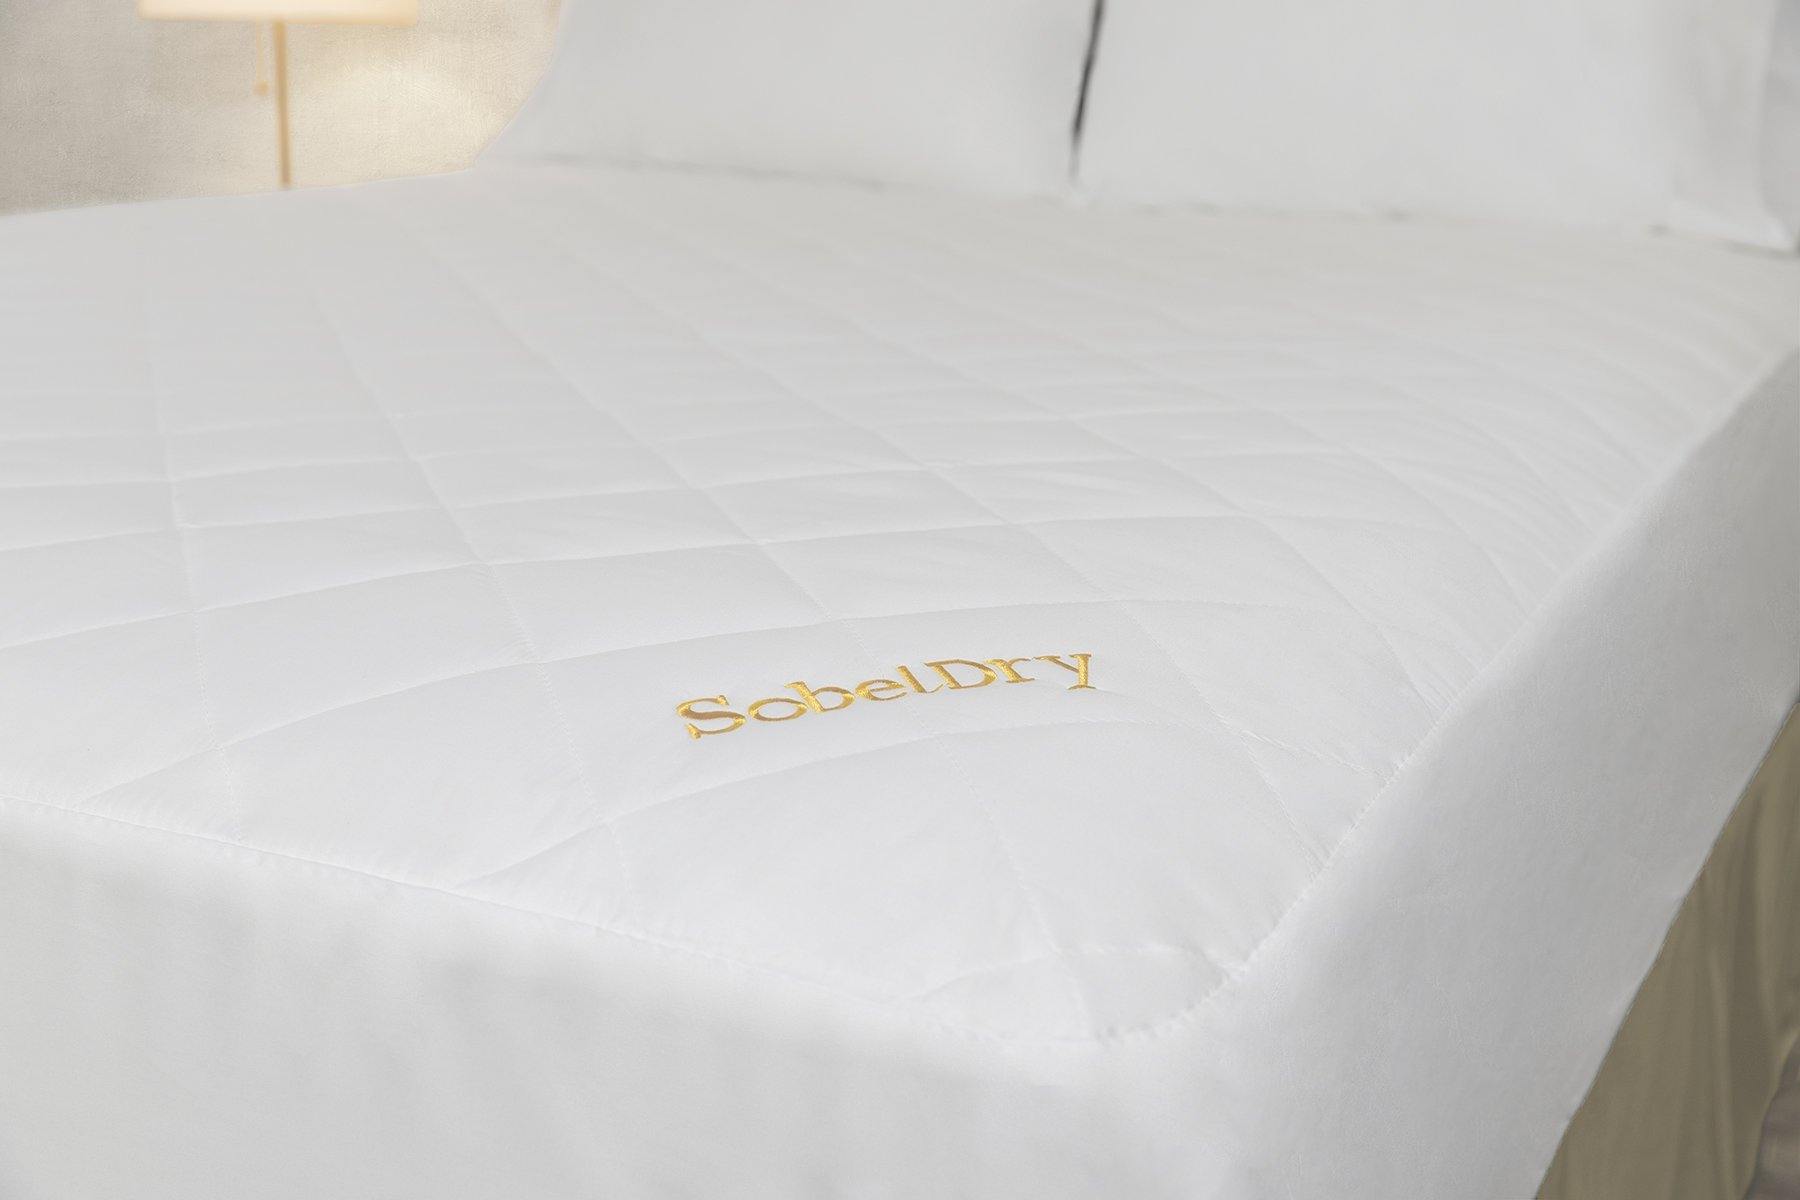 Sobel Dry Mattress Protector, a Patented Waterproof Protective Pad